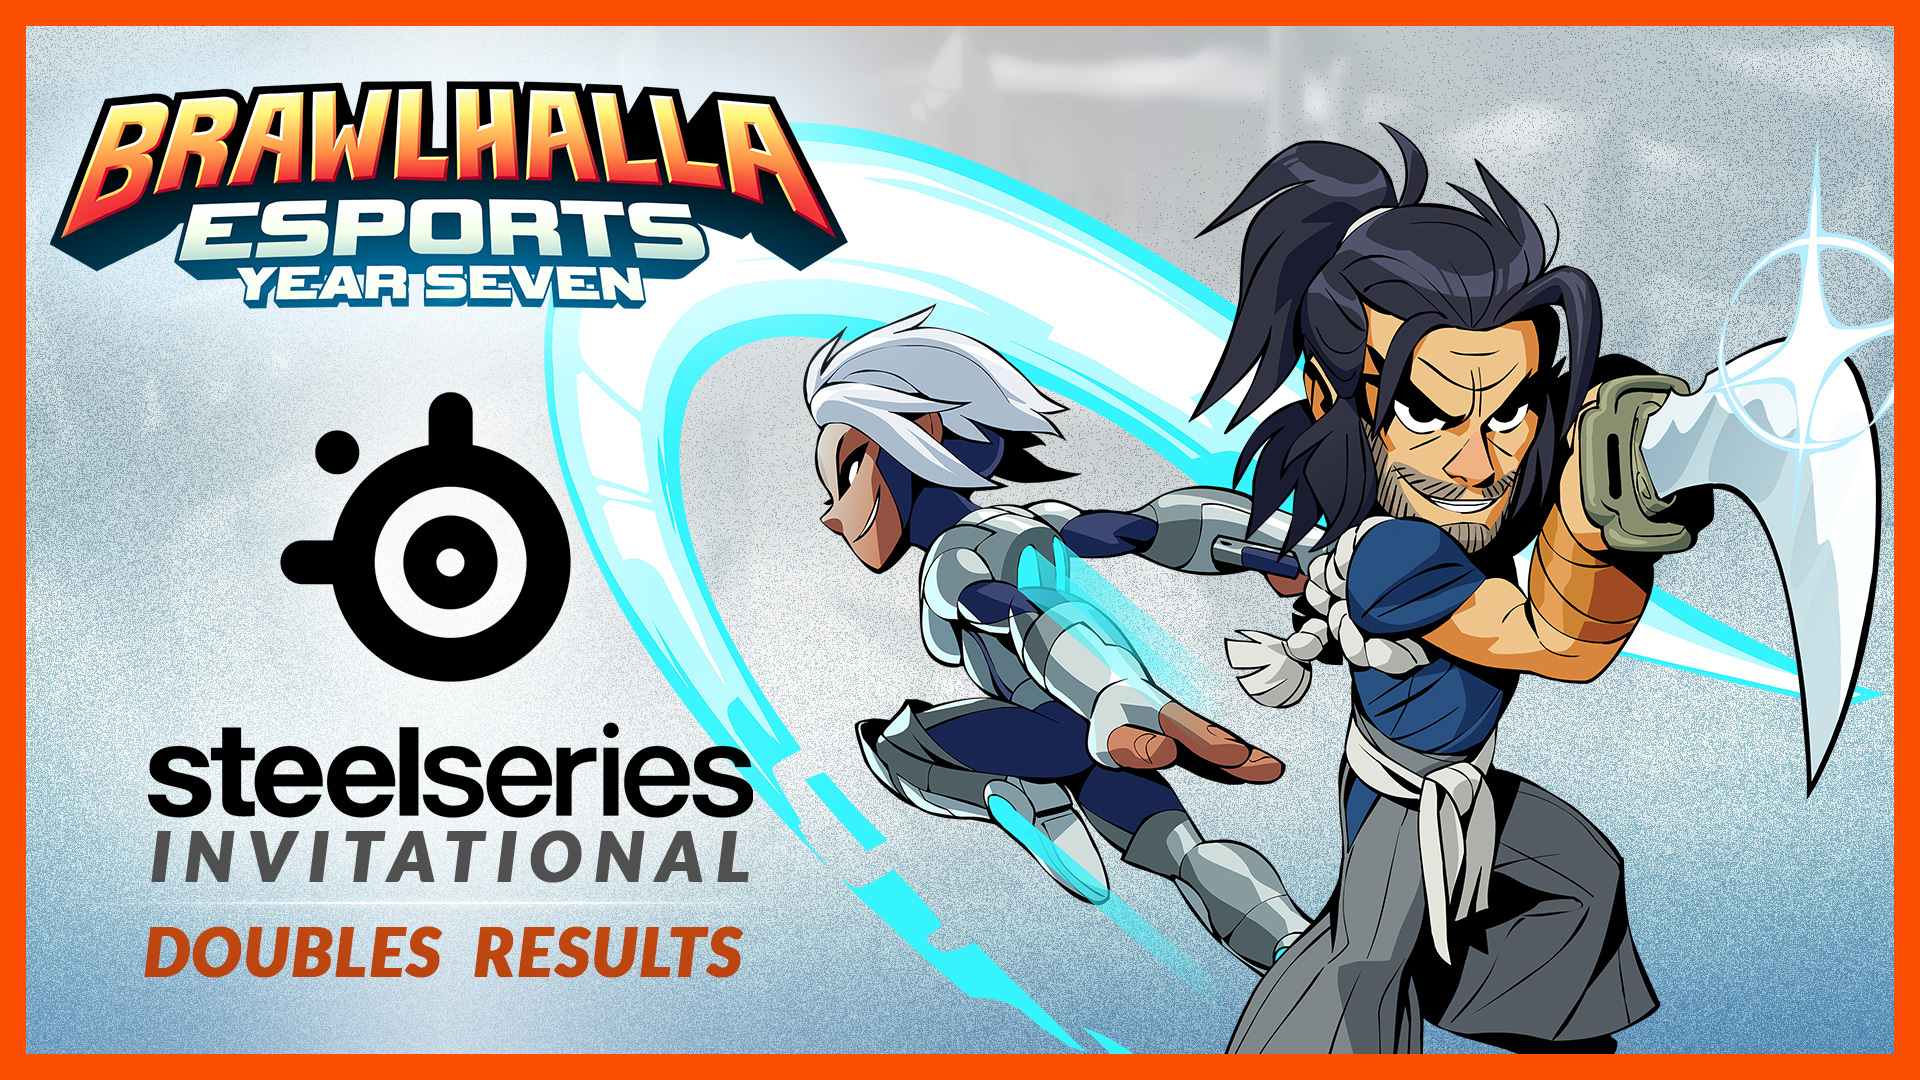 Fozey and Sarme Win the SteelSeries Invitational Doubles in EU, Luna and Pugsy Continue Their Win Streak in NA